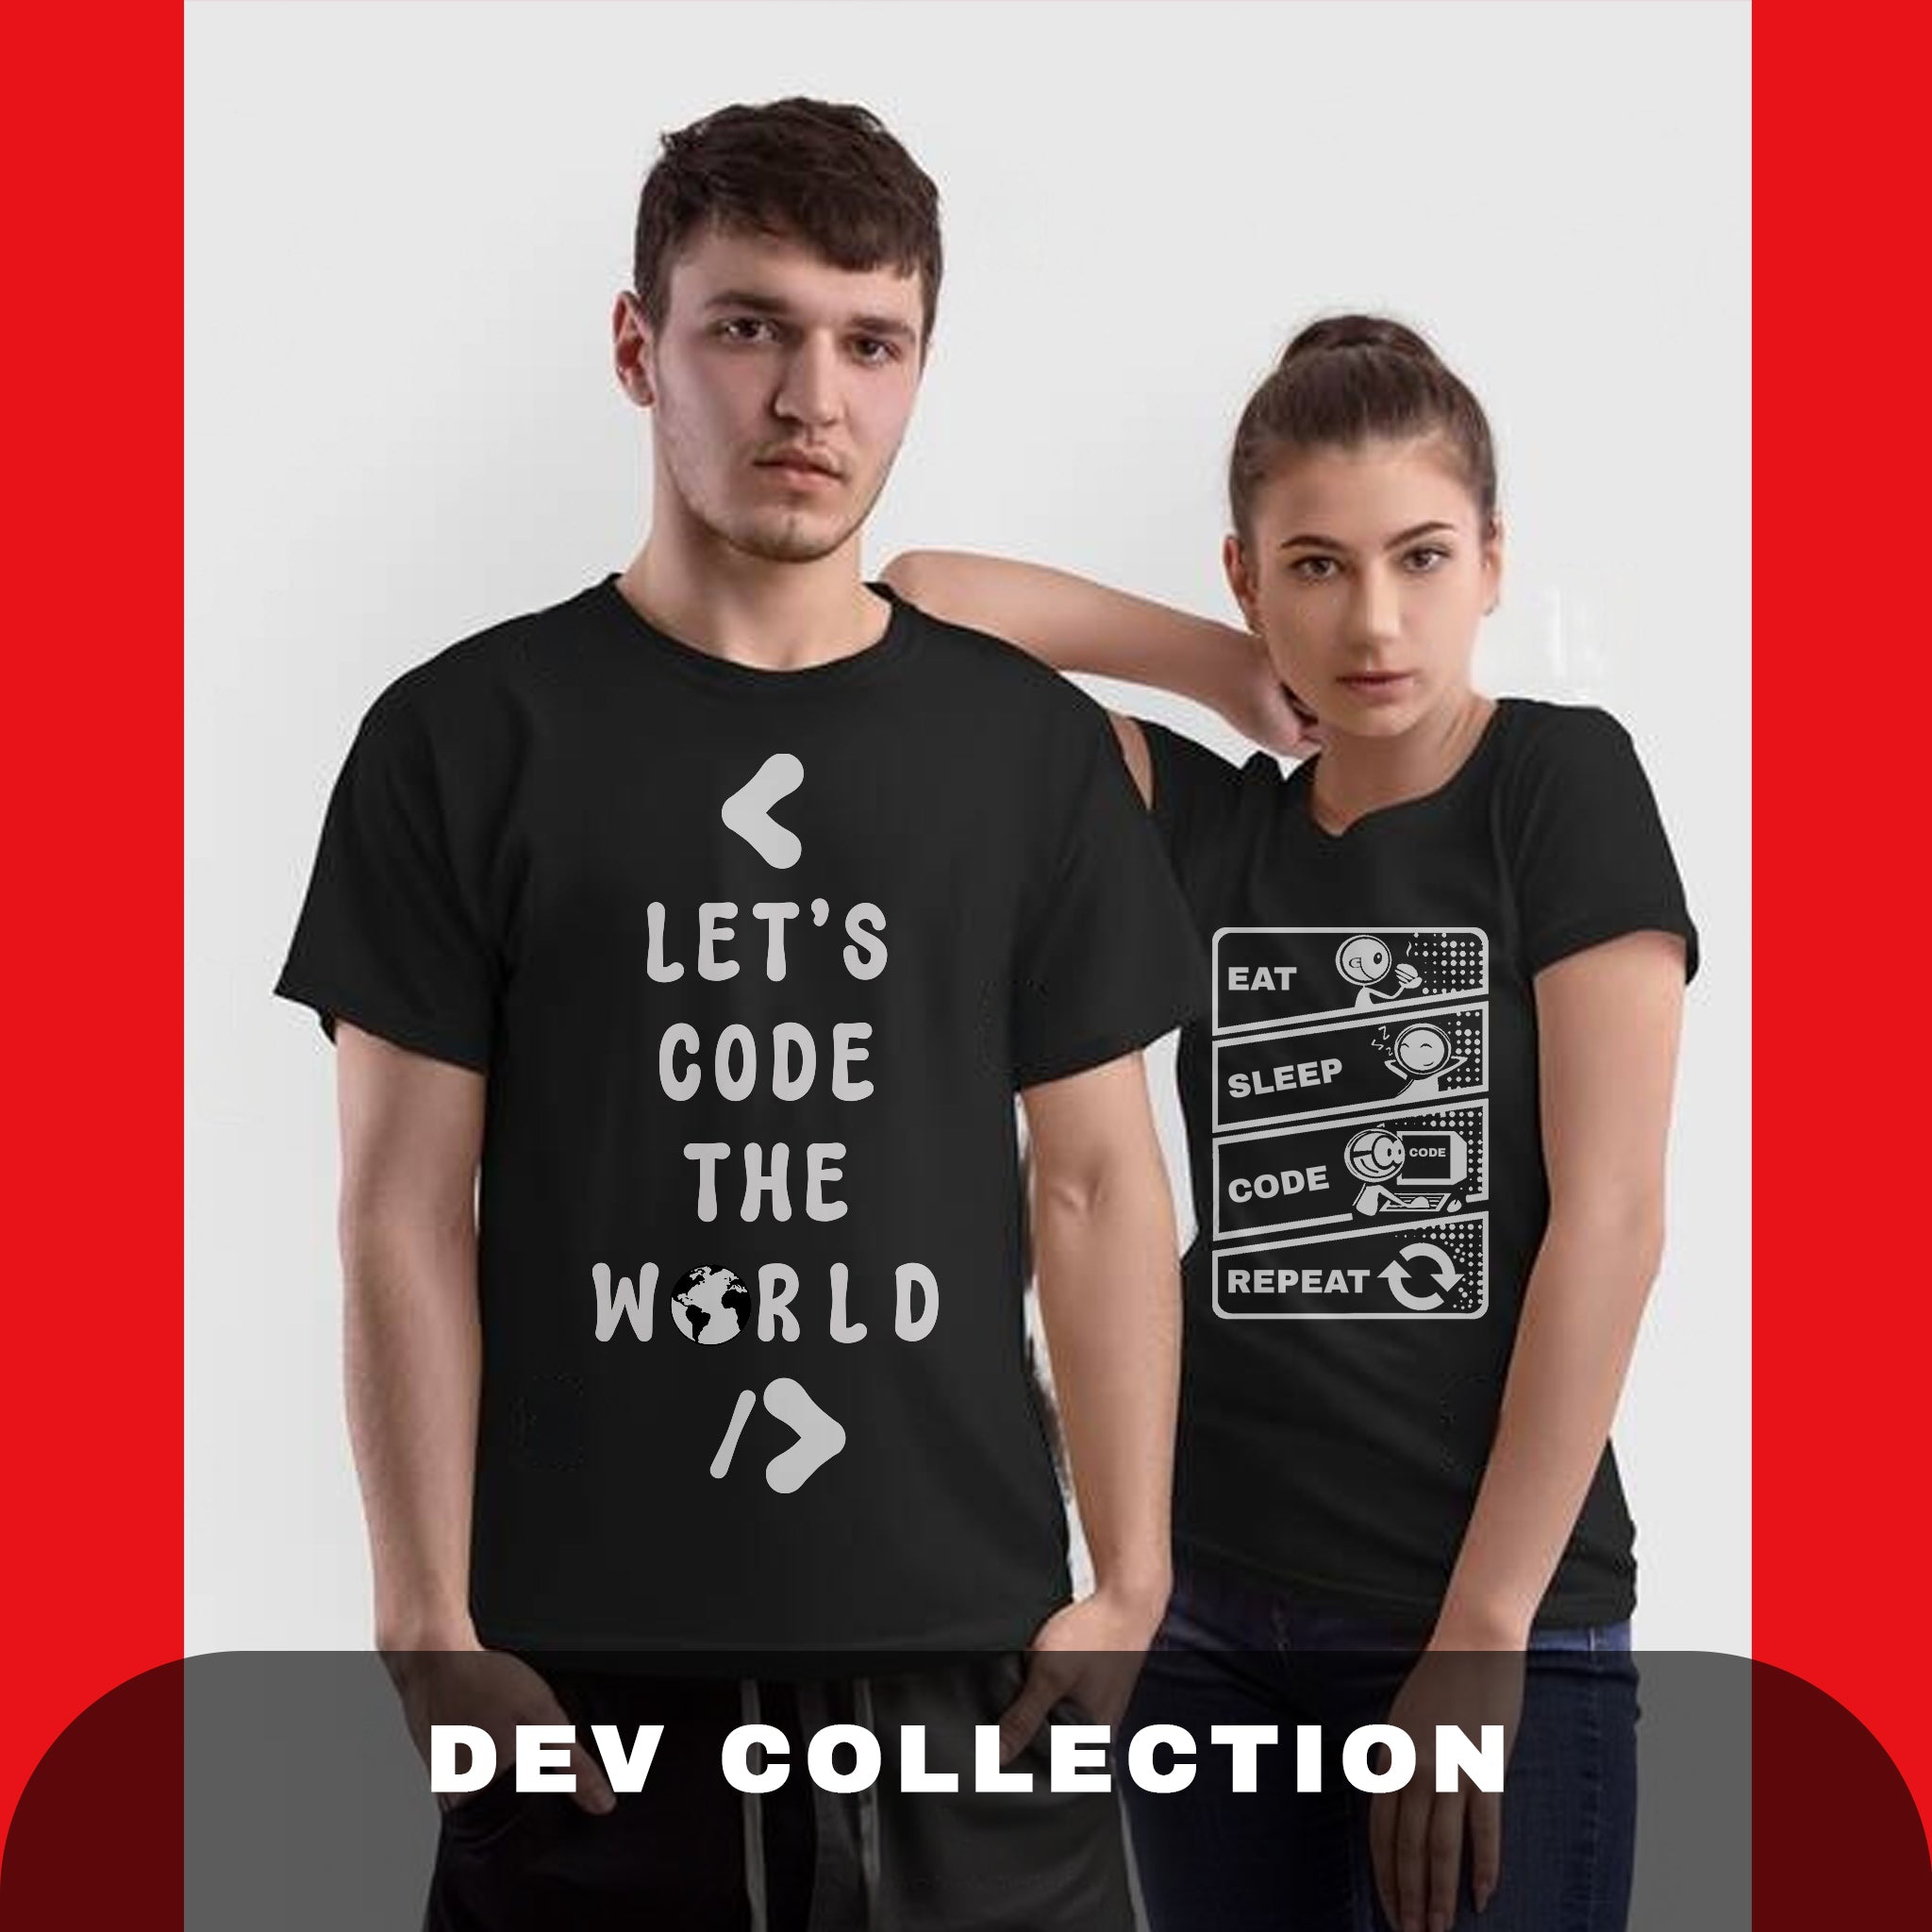 Developers T-Shirts Collection Image